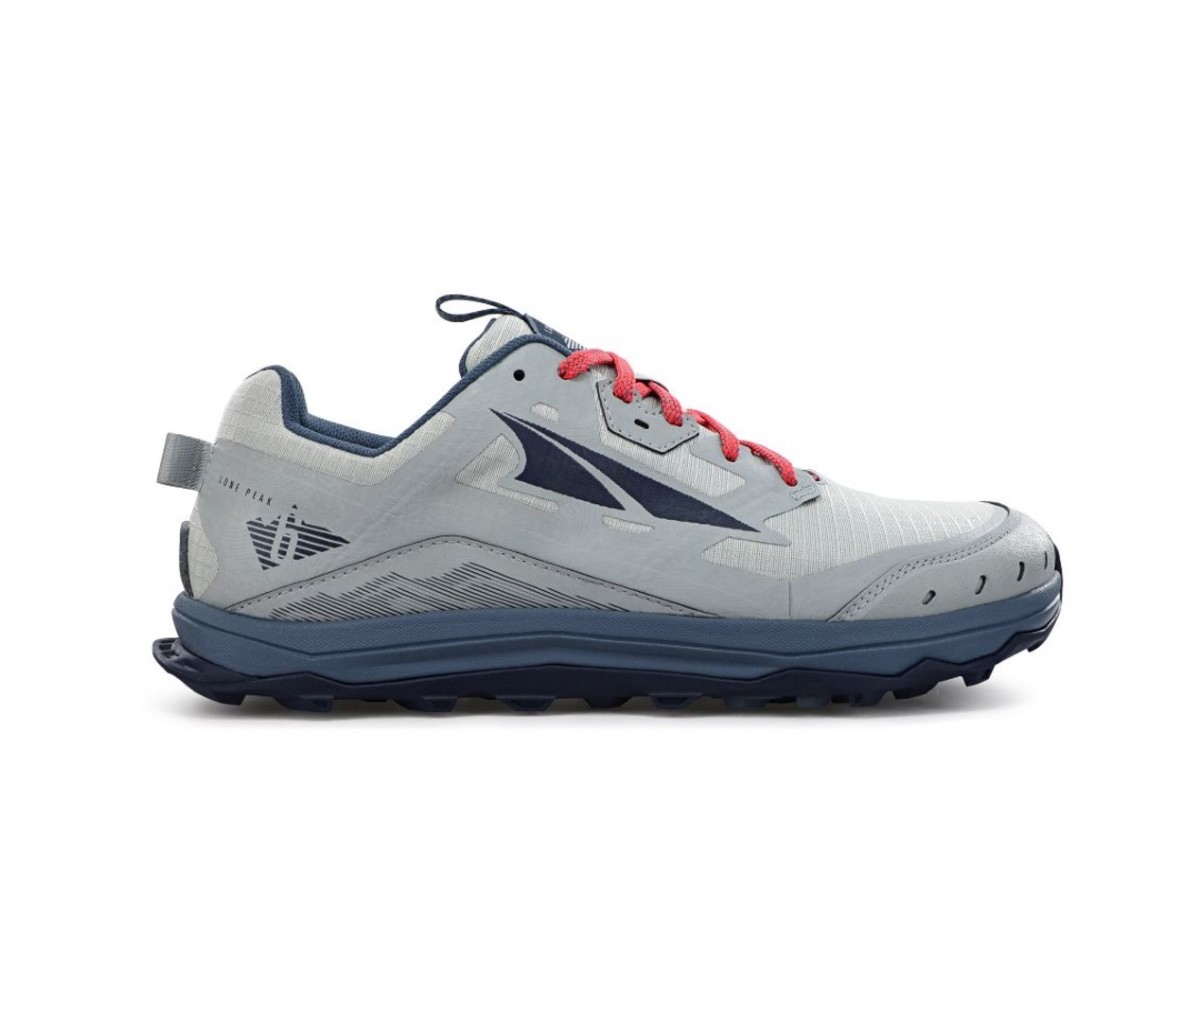 Stay sure-footed in the woods with the Altar Lone Peak 6 trail shoes.